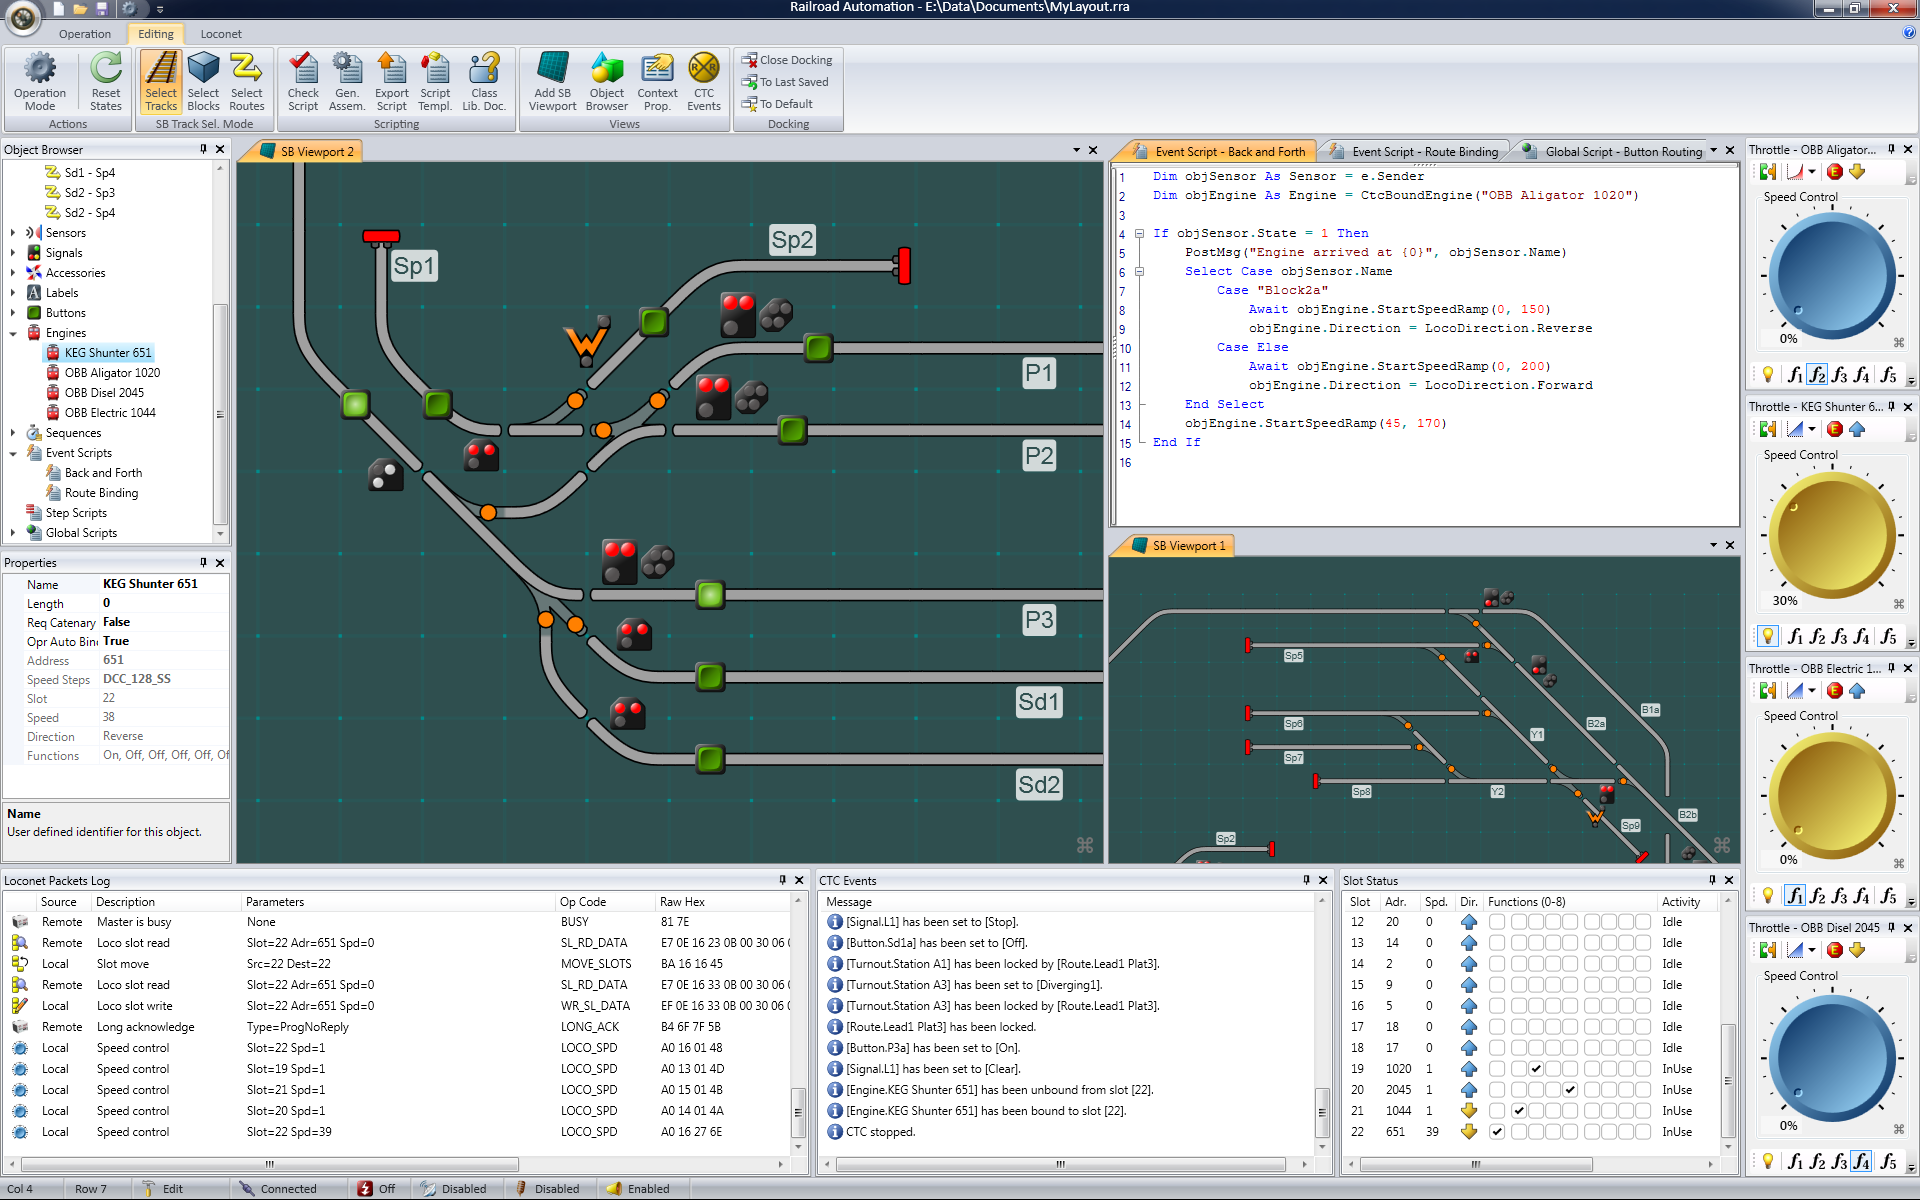 Controlling a Model Railroad using mbed | Mbed